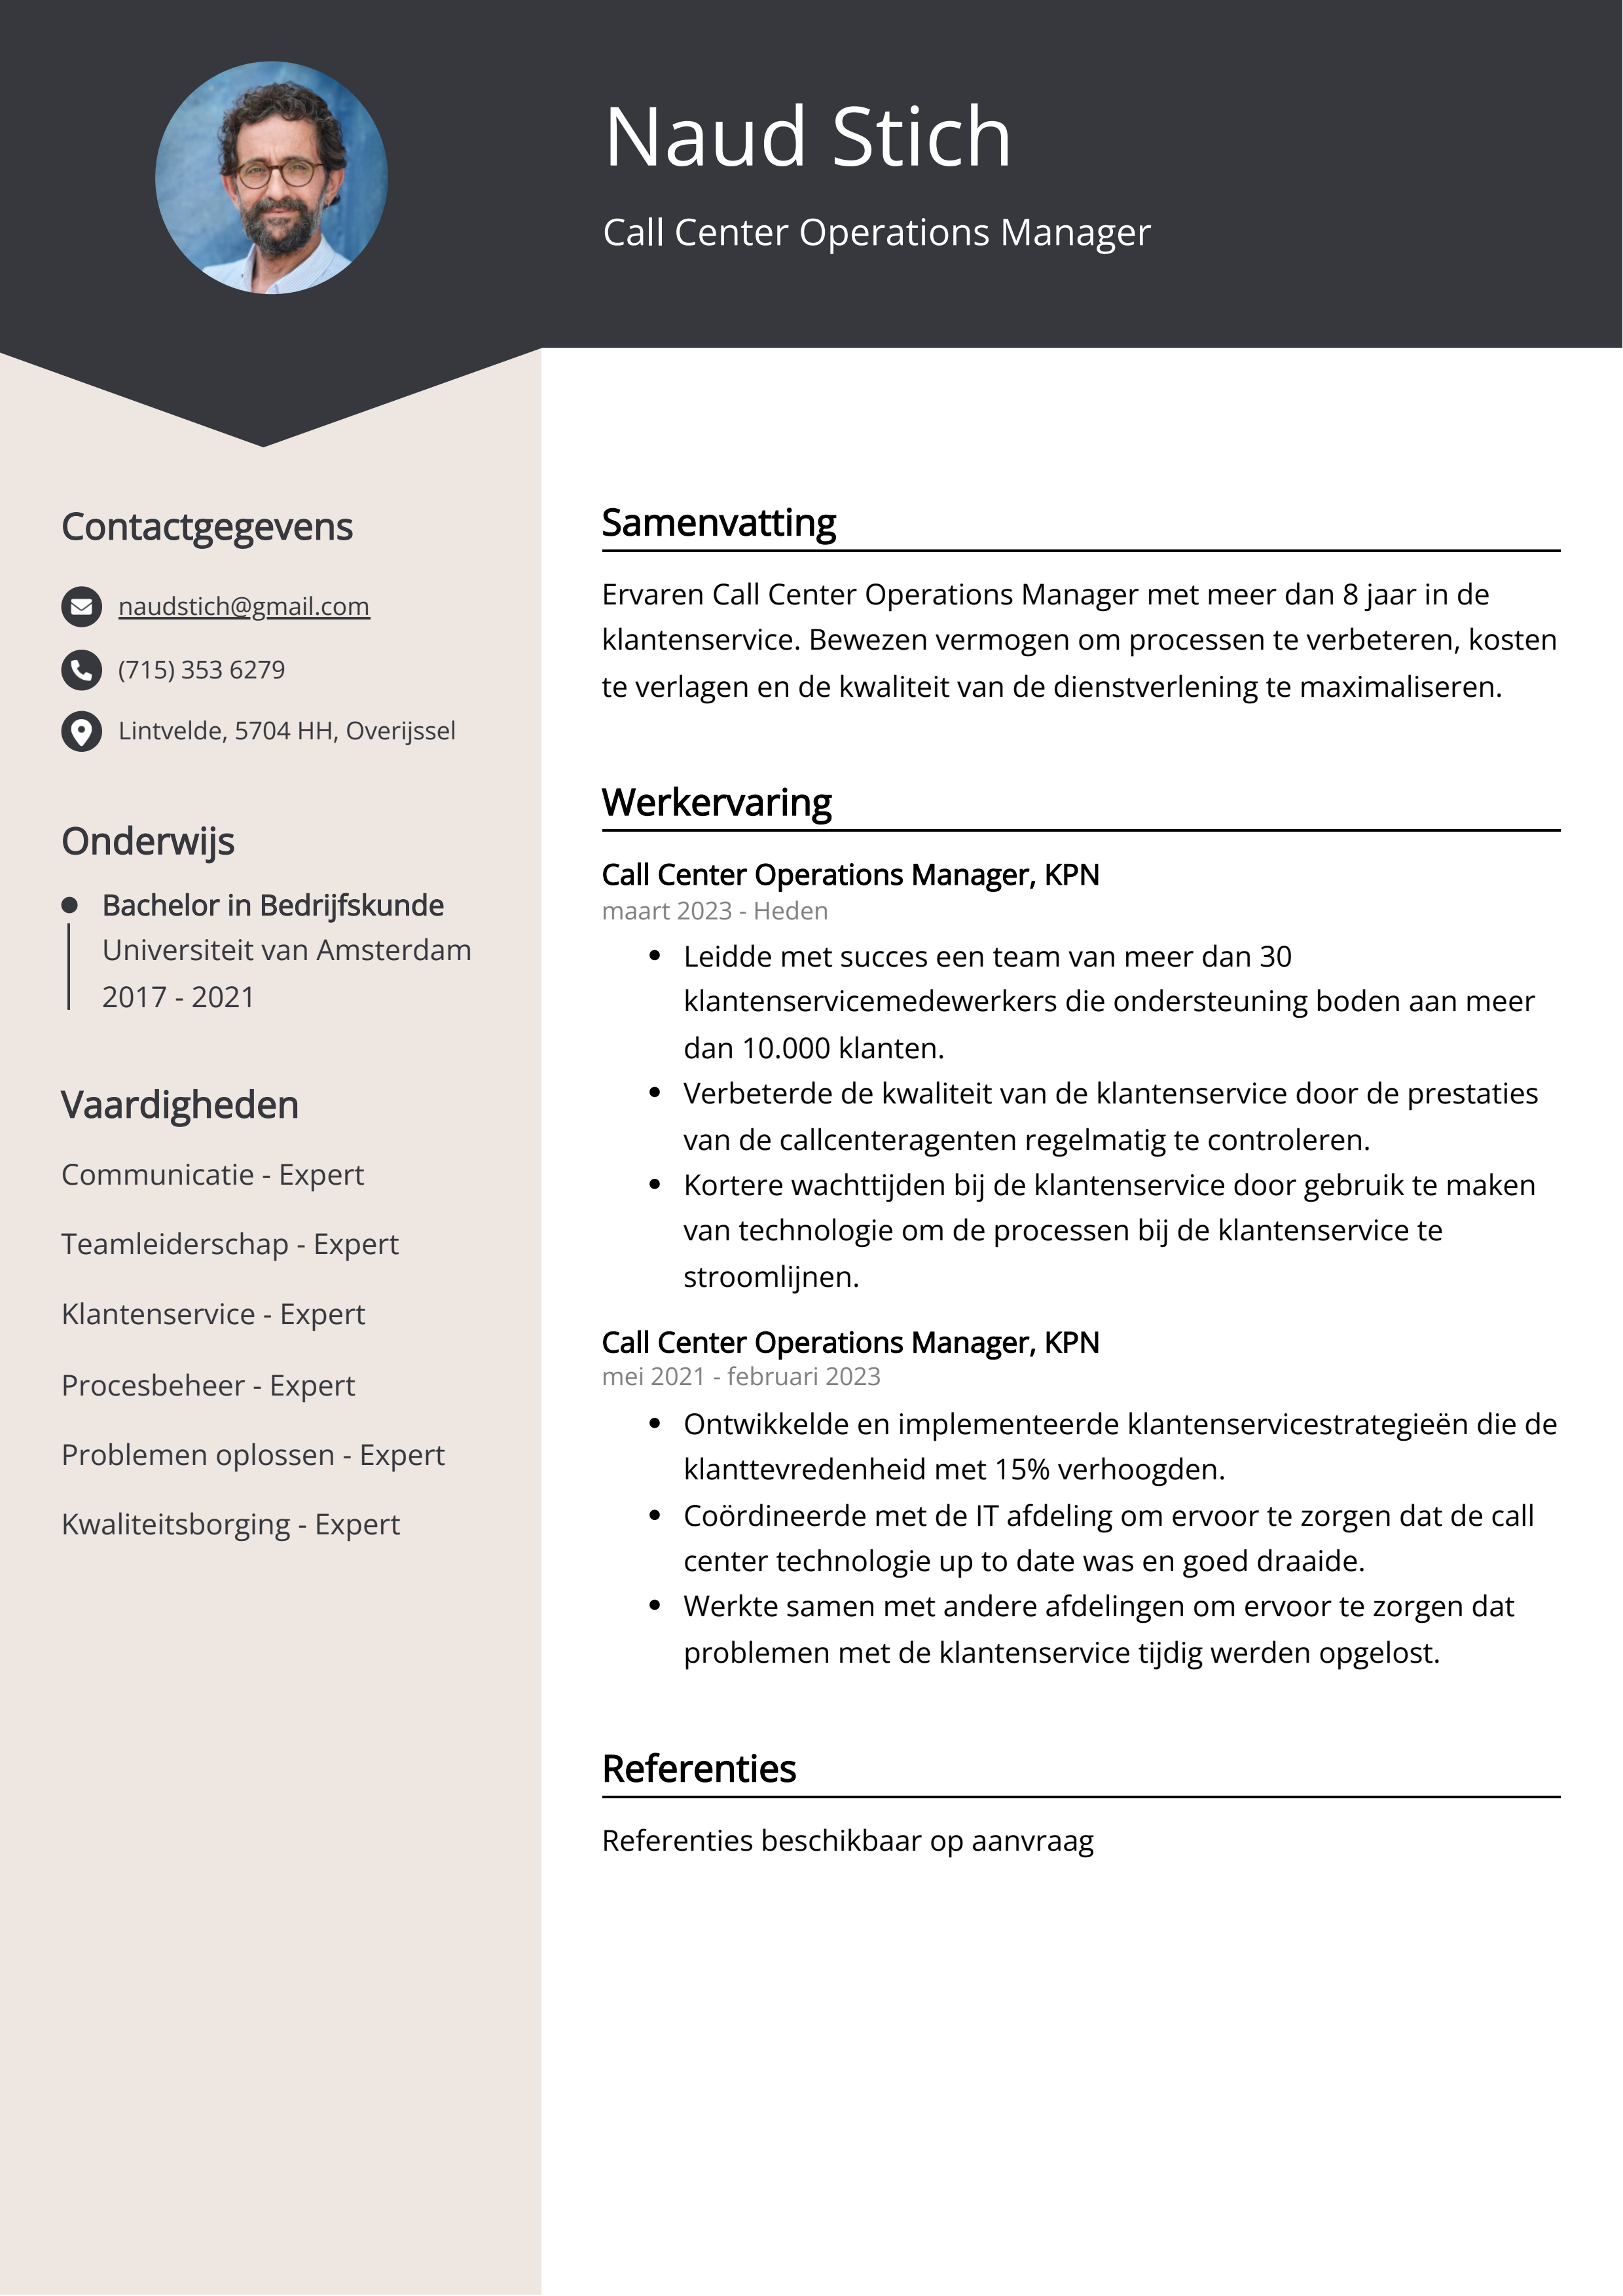 Call Center Operations Manager CV Voorbeeld